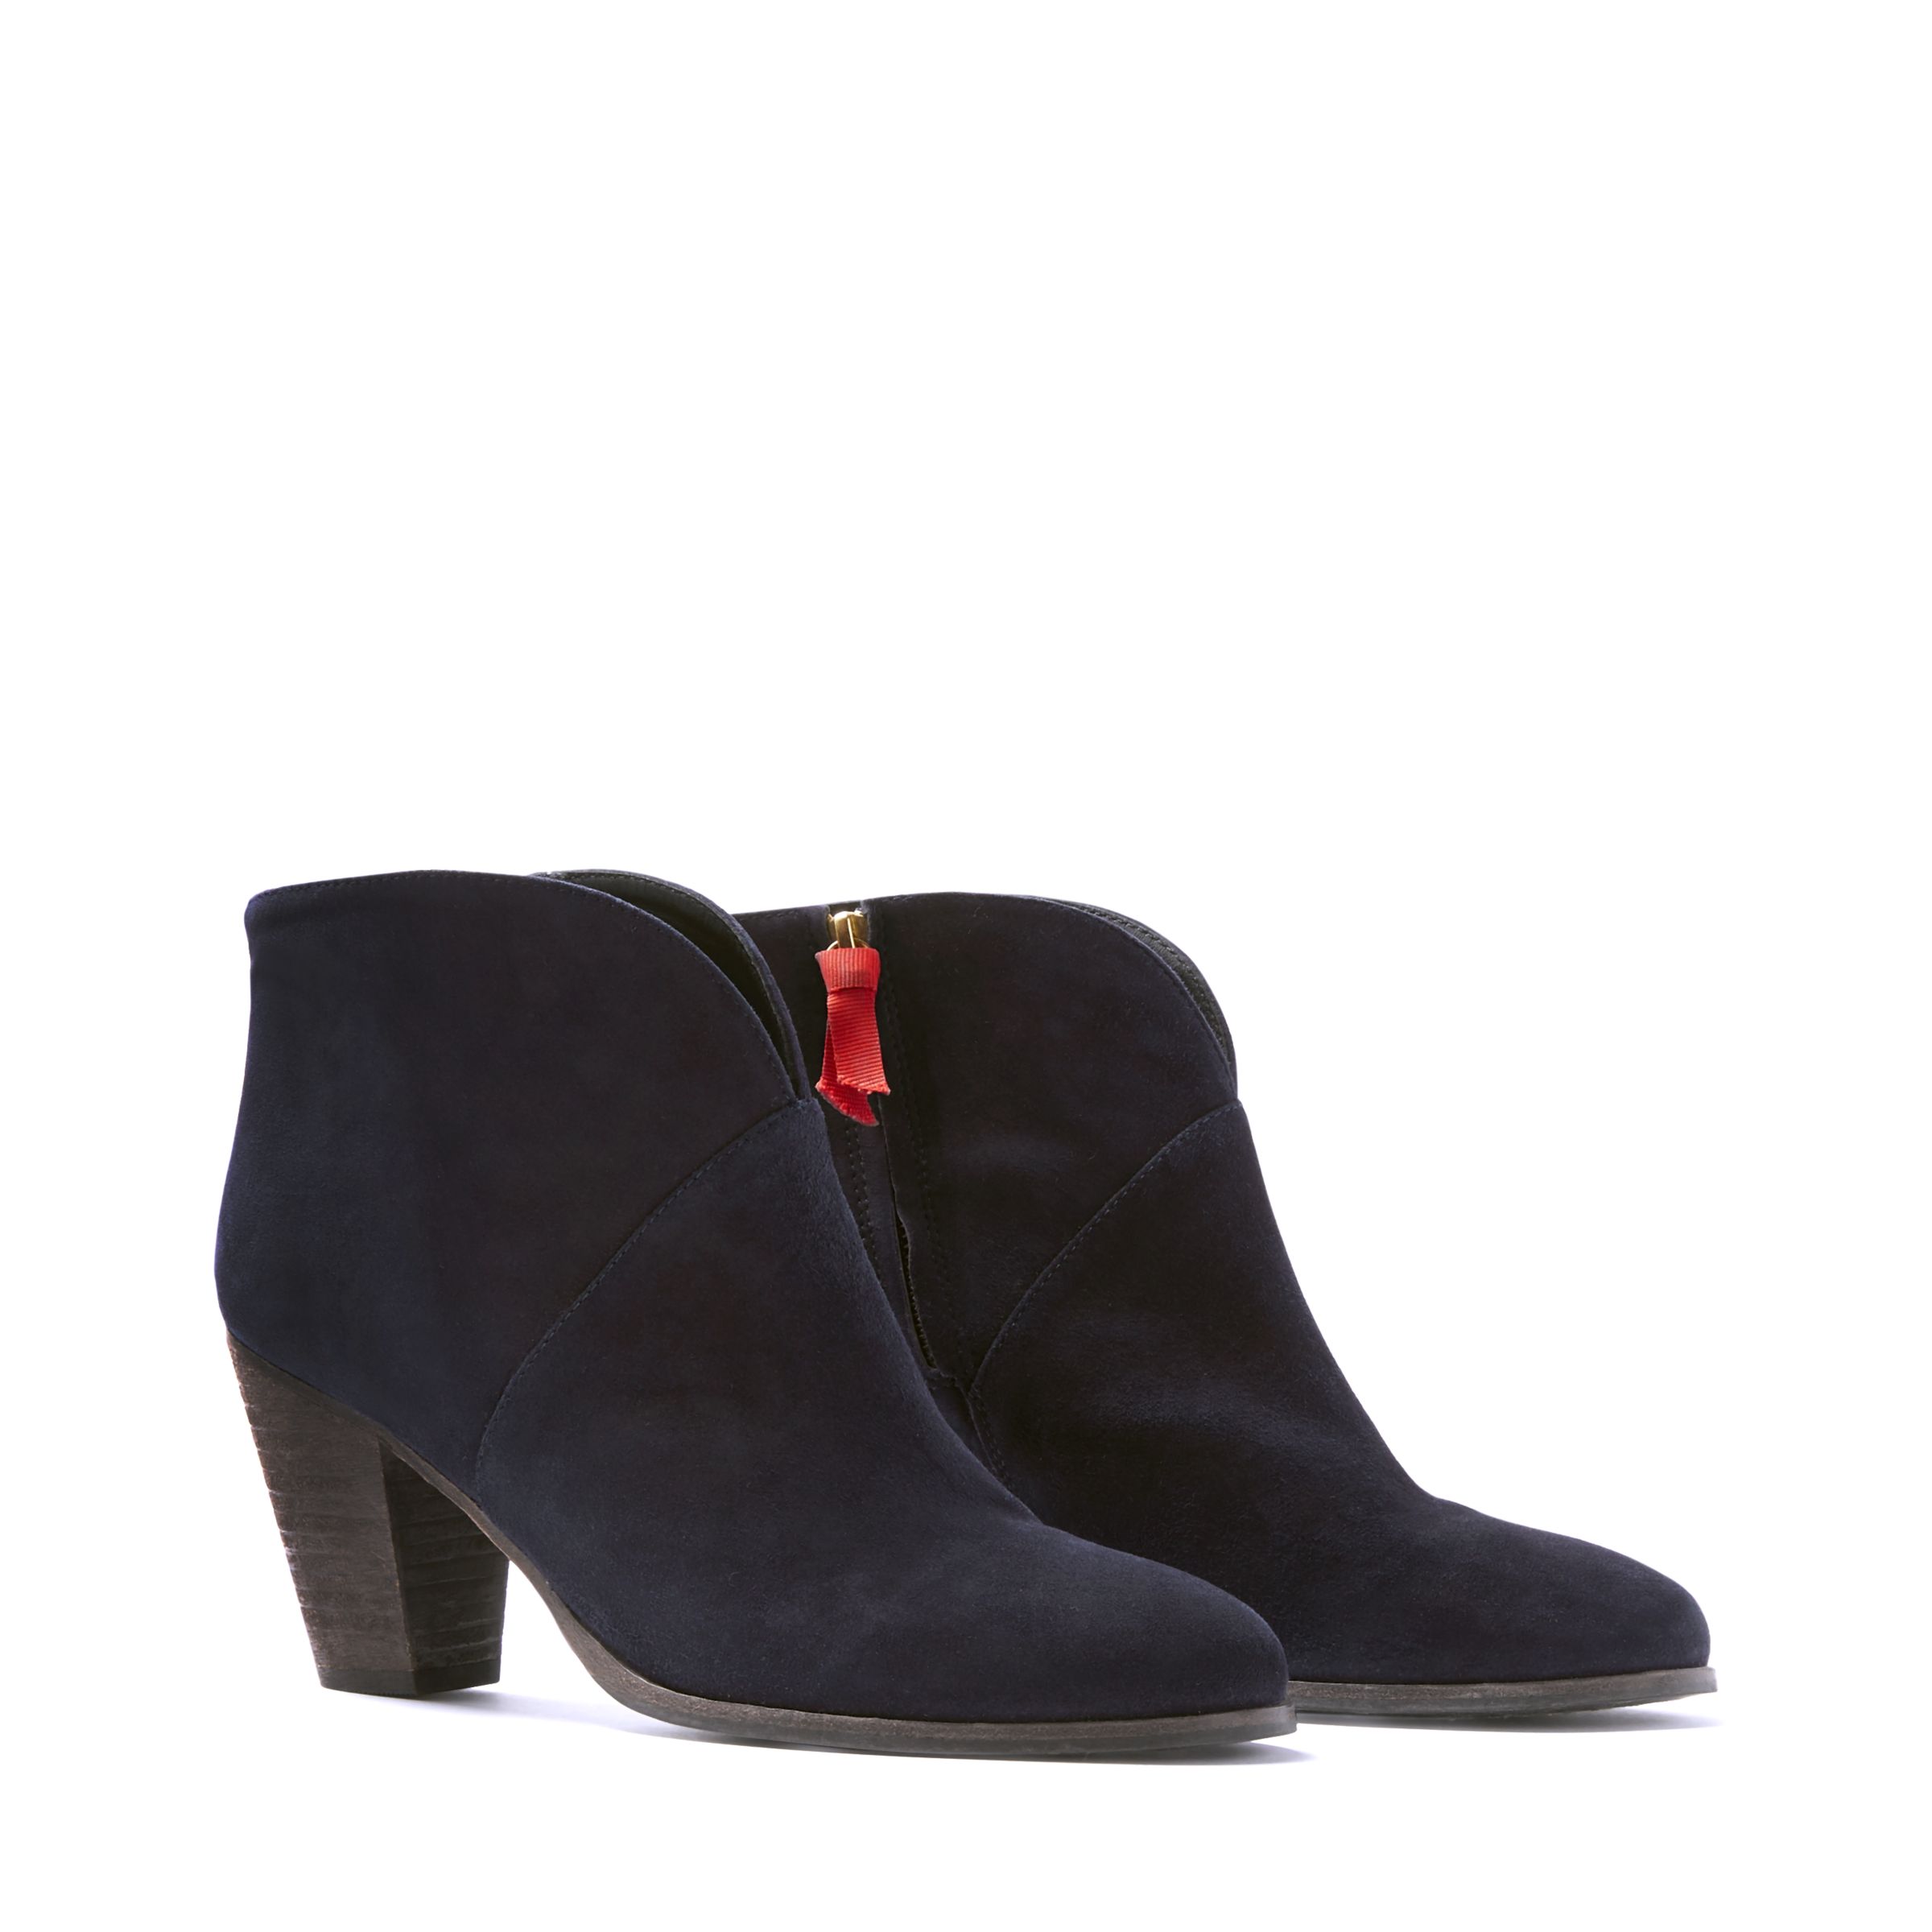 Buy Boden Marlow Block Heeled Ankle Boots | John Lewis